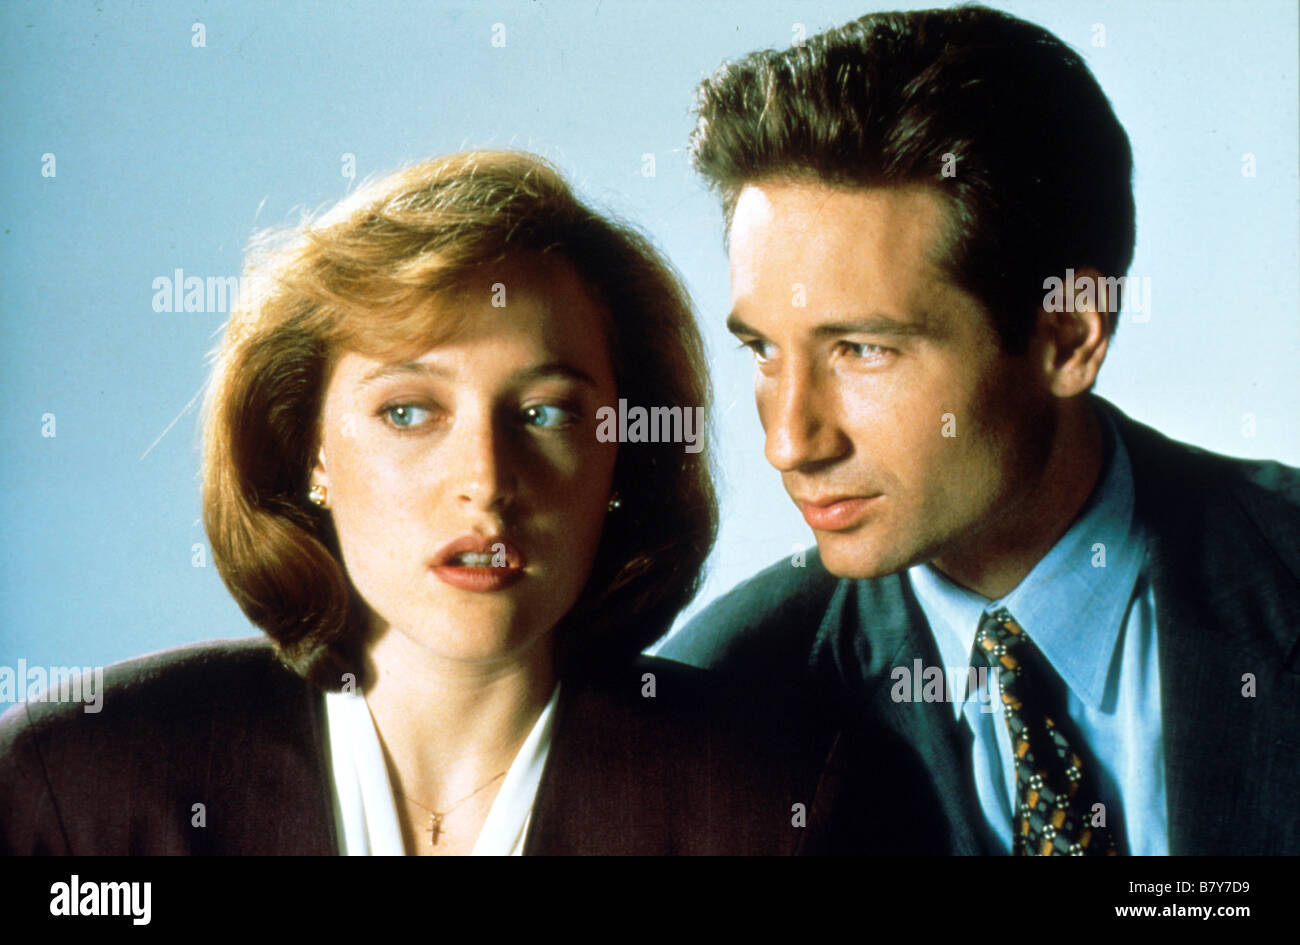 The X Files  TV Series1993 - 2002 USA 1993 Seaon 1 Created by Chris Carter David Duchovny , Gillian Anderson Stock Photo